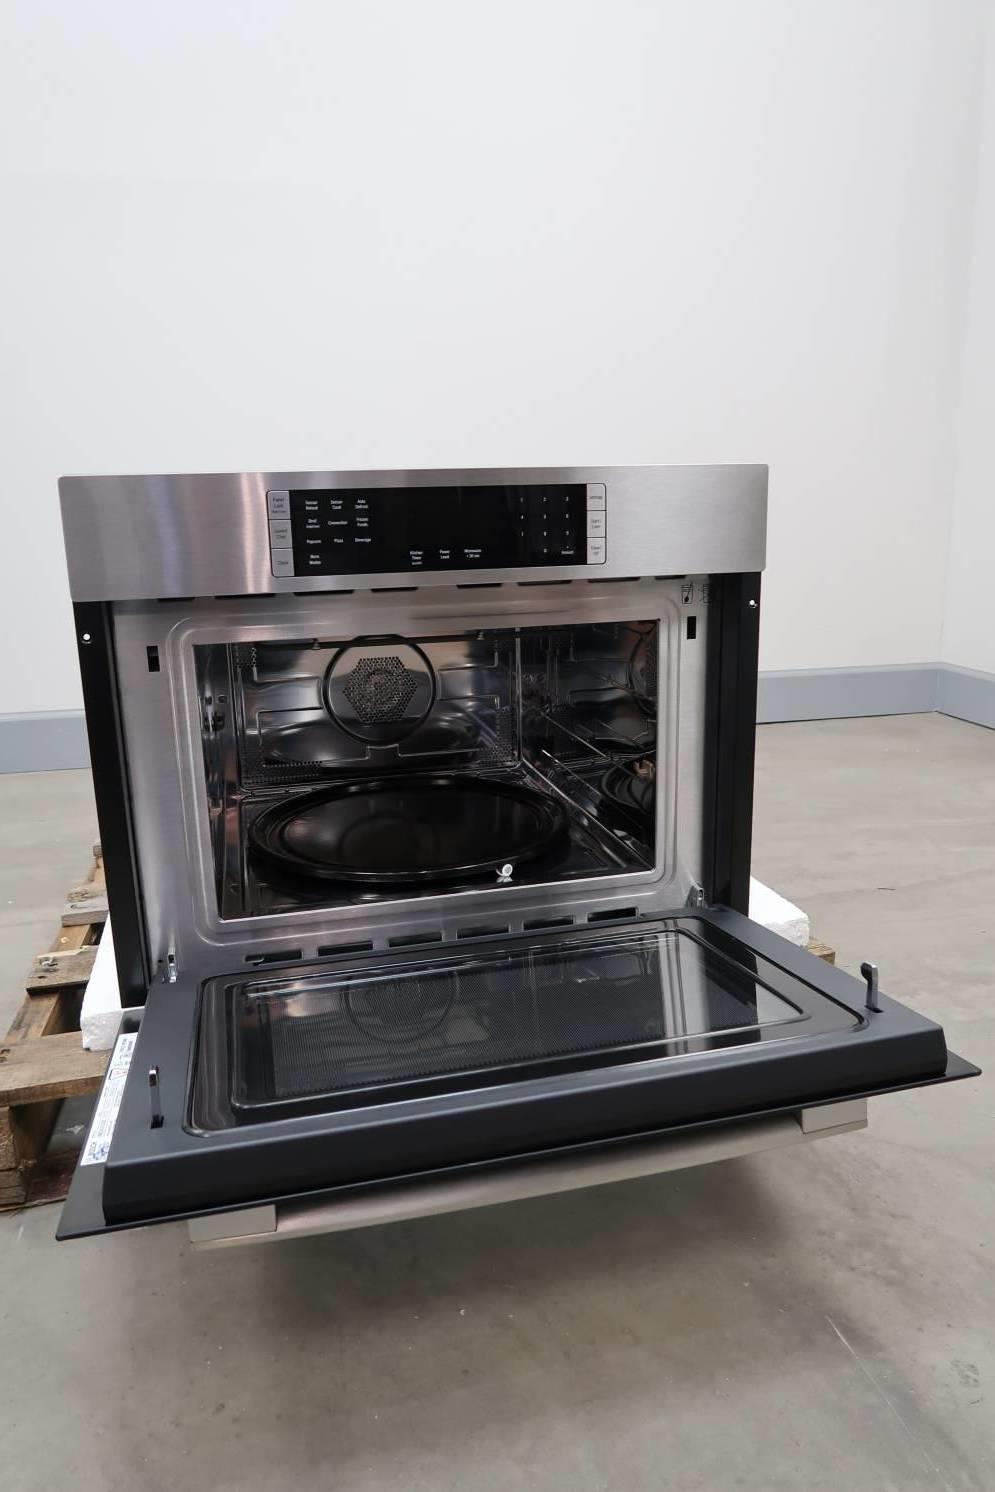 HMC54151UC1 by Bosch - 500 Series, 24 Speed / Convection Microwave,  120Volt, SS *Overstock Clearance*